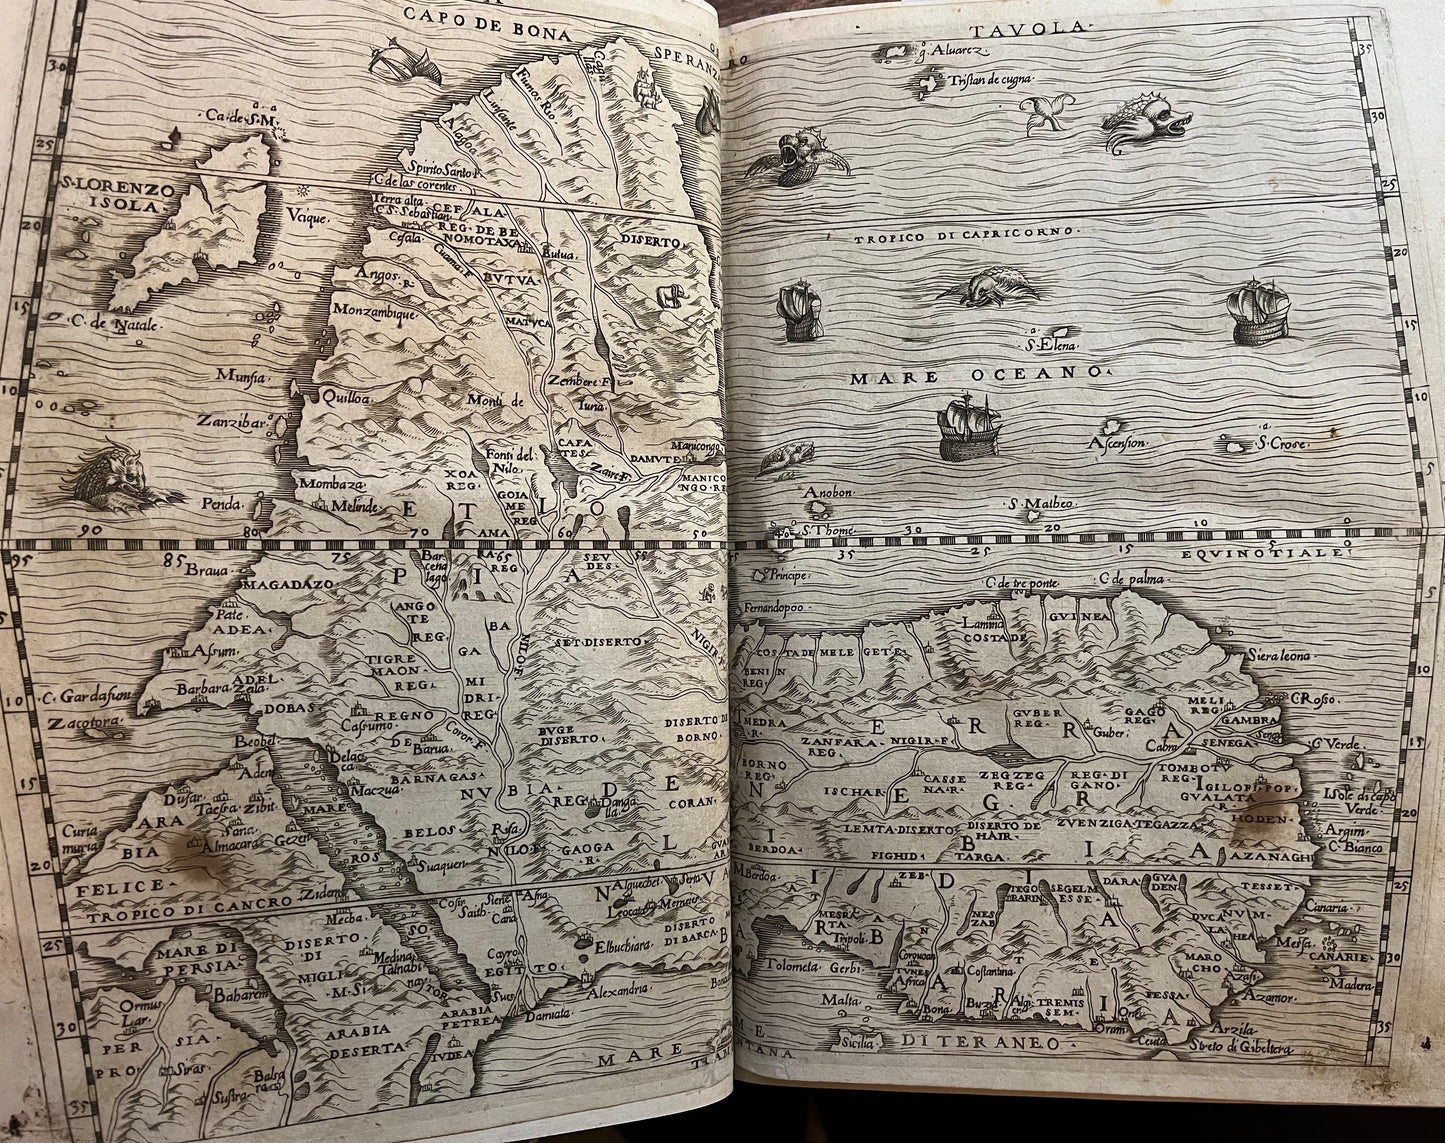 Ramusio - Delle Navigationi et Viaggi - Complete three volumes with 10 double page maps 1563, 1574, 1556. Rare FIRST EDITION of the Third Volume on the Americas